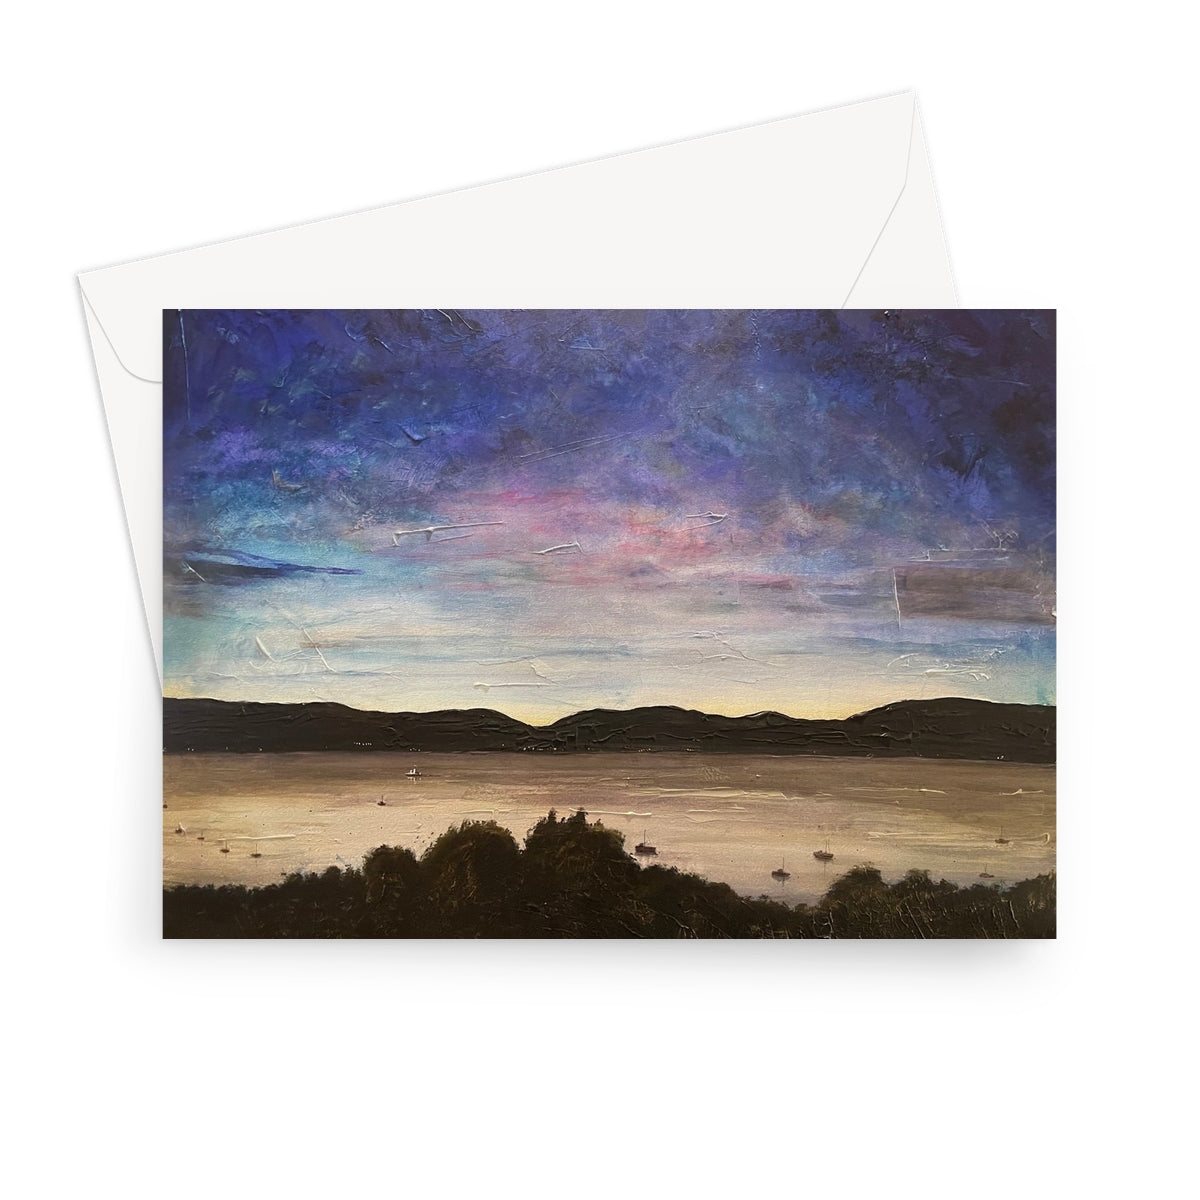 River Clyde Twilight Art Gifts Greeting Card